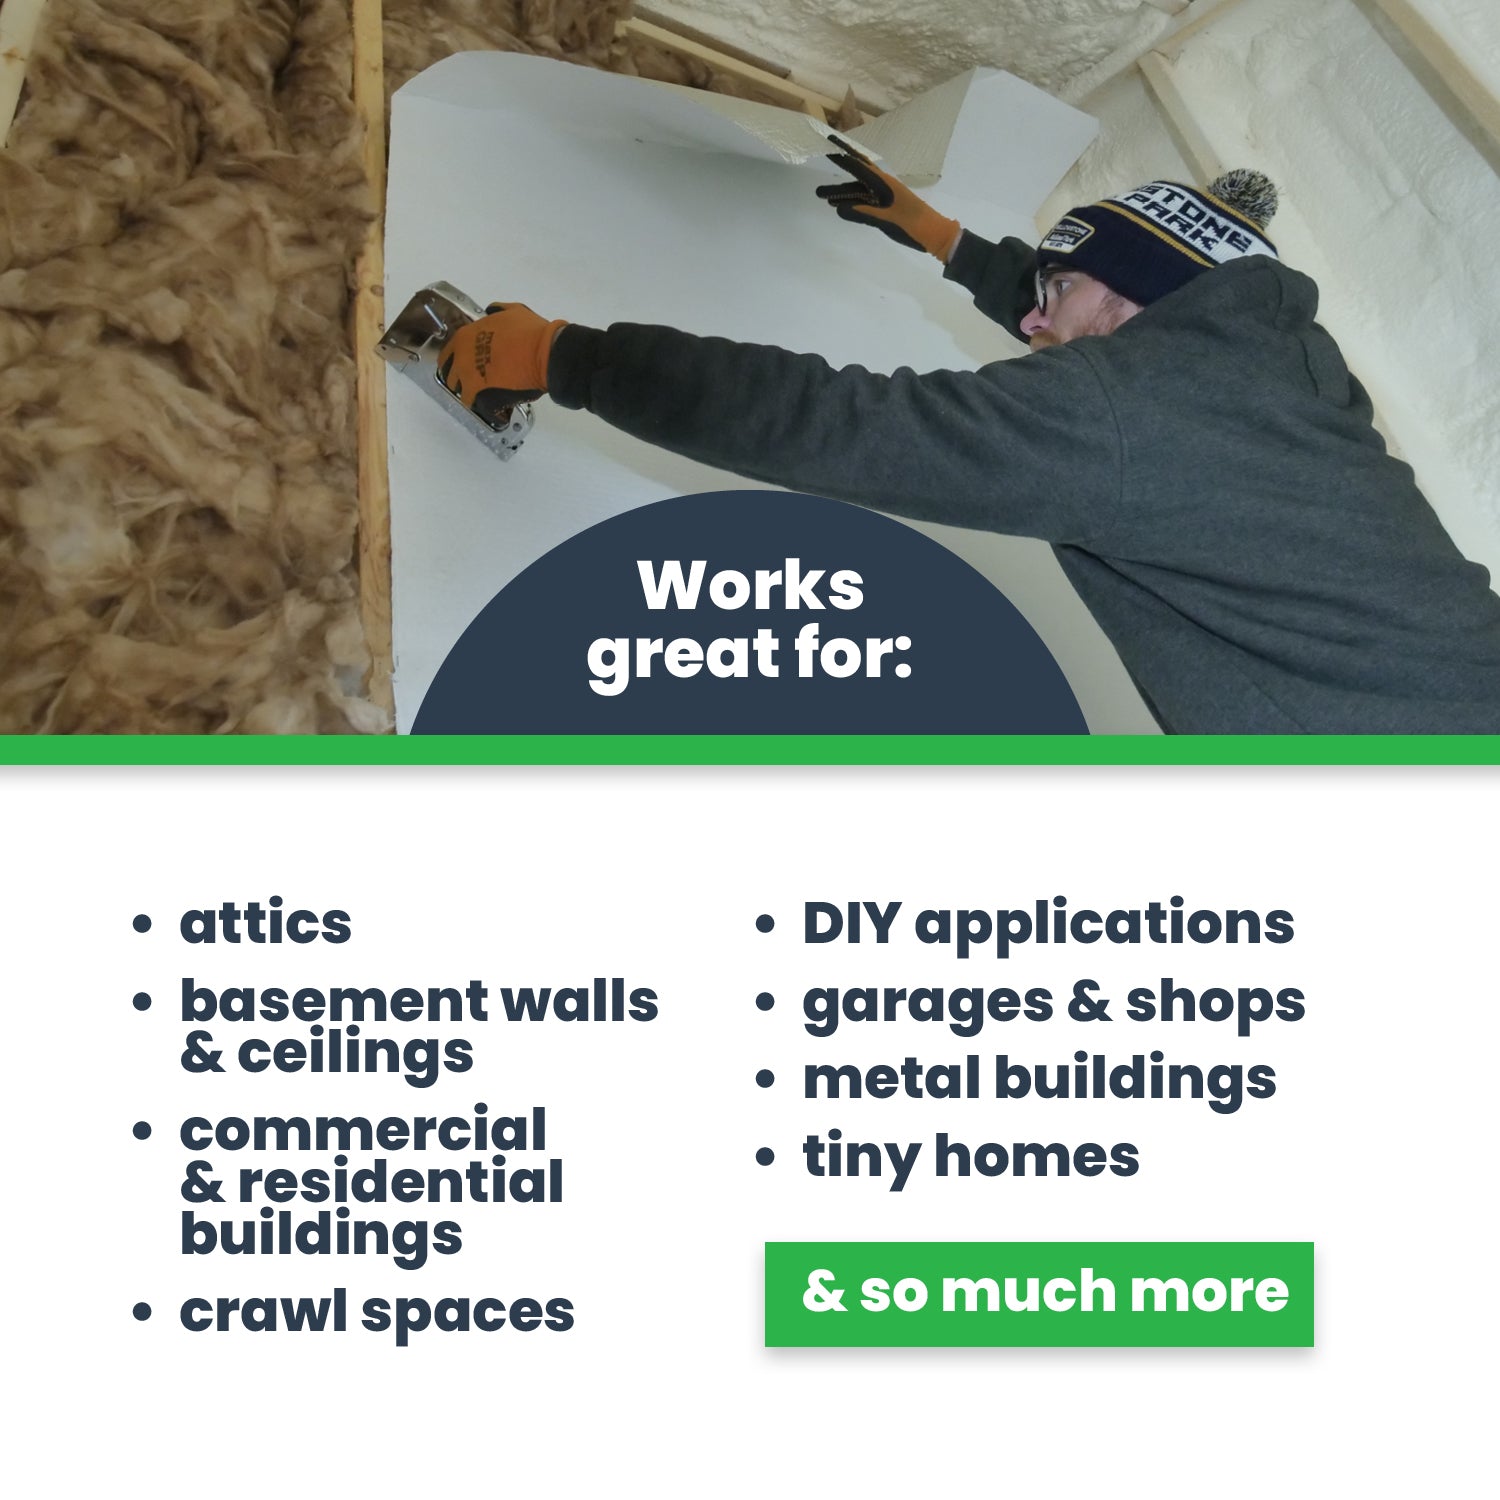 double bubble applications for attics, basements, commercial and residential buildings, crawl spaces, garages, metal buildings, tiny homes, and more